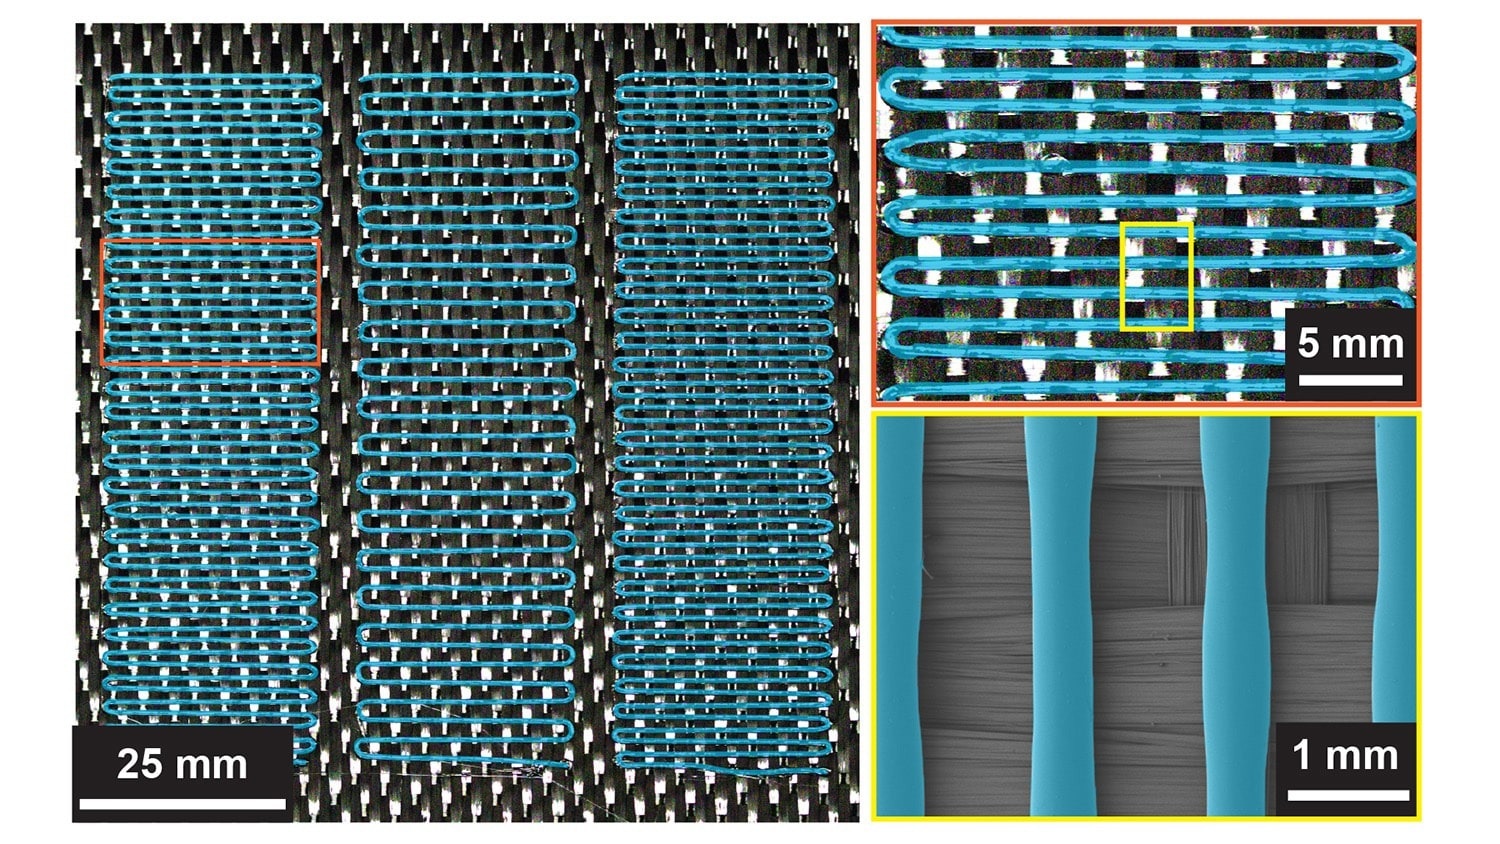 New Self-Healing Materials Enable Structures to Repair Themselves